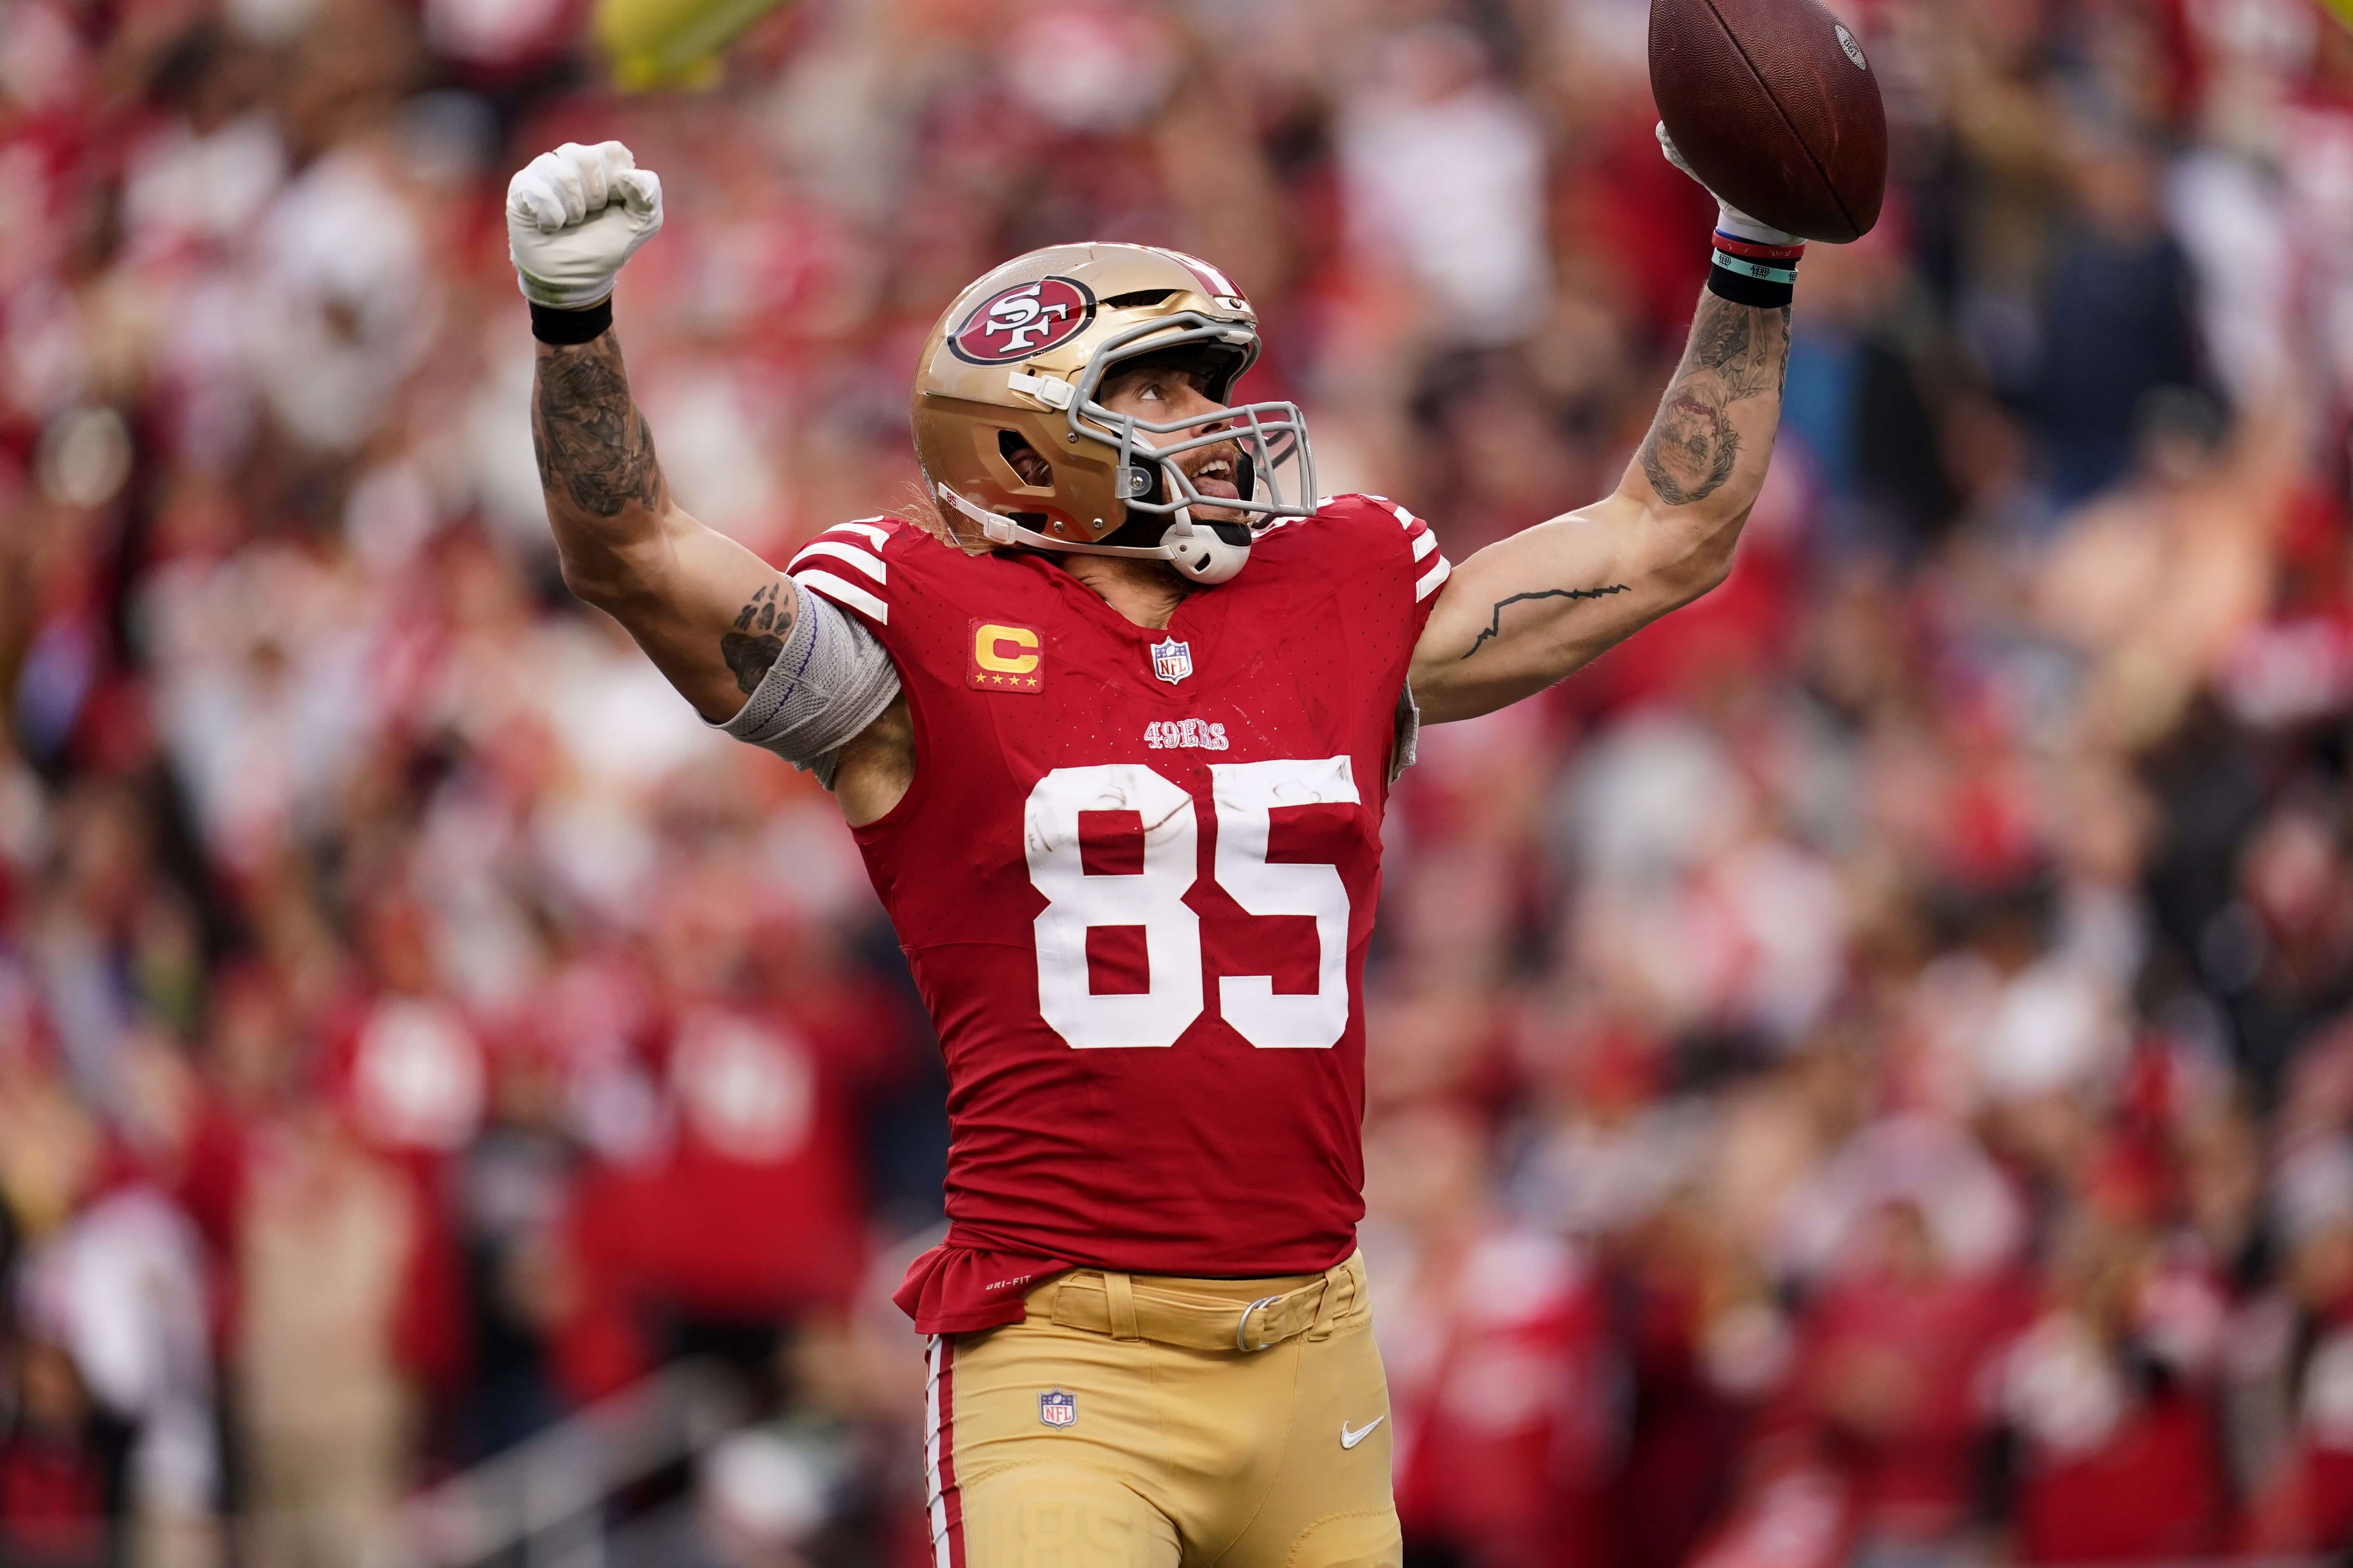 Super Bowl Predictions: George Kittle's Longest Catch 30+, 40+, 50+ Yards